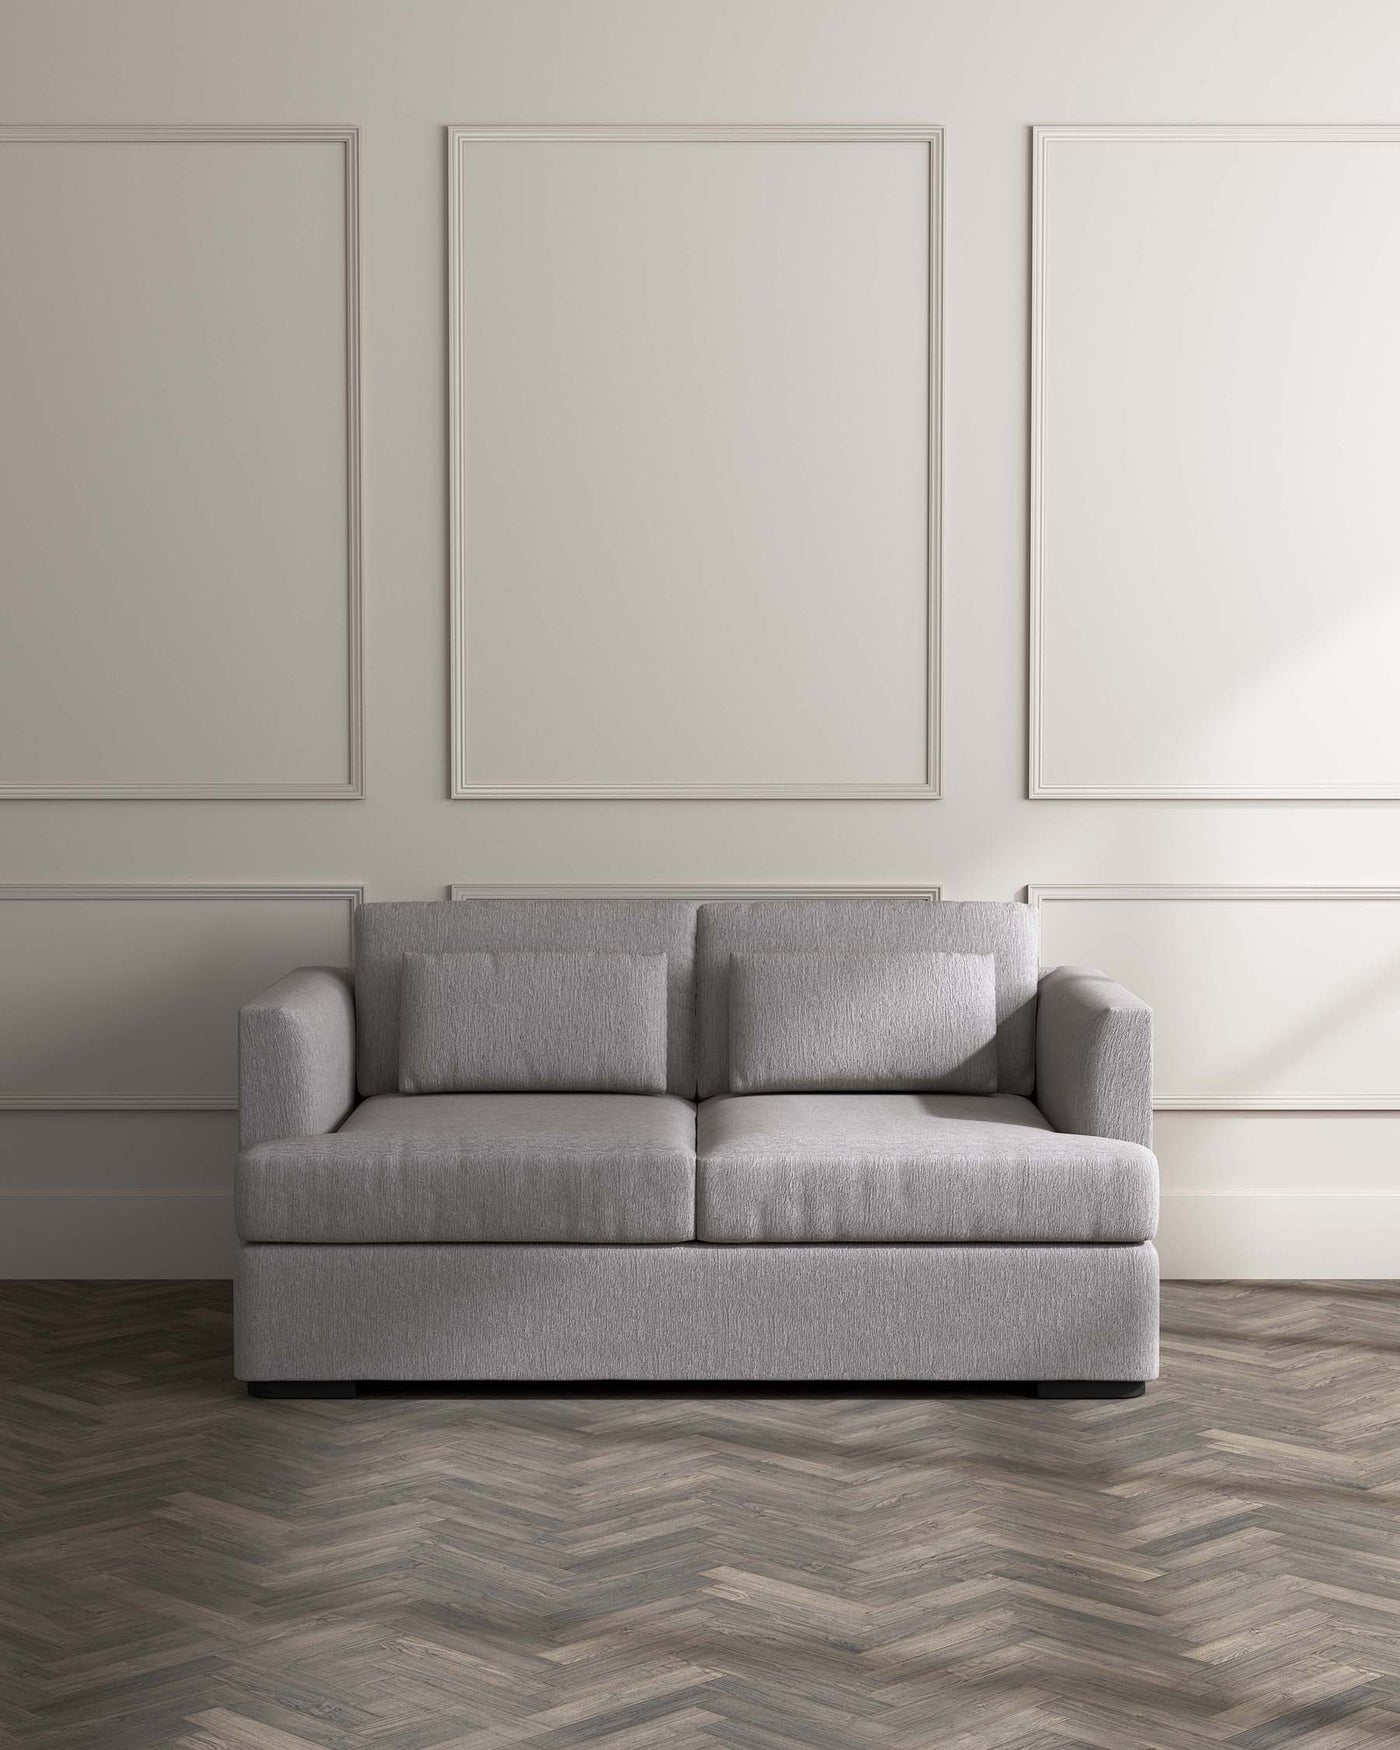 A contemporary grey fabric sofa with clean lines, featuring deep cushioned seats, a low profile, boxy frame, and square armrests, standing on a herringbone patterned wooden floor against a wall with simple framed decorative mouldings.